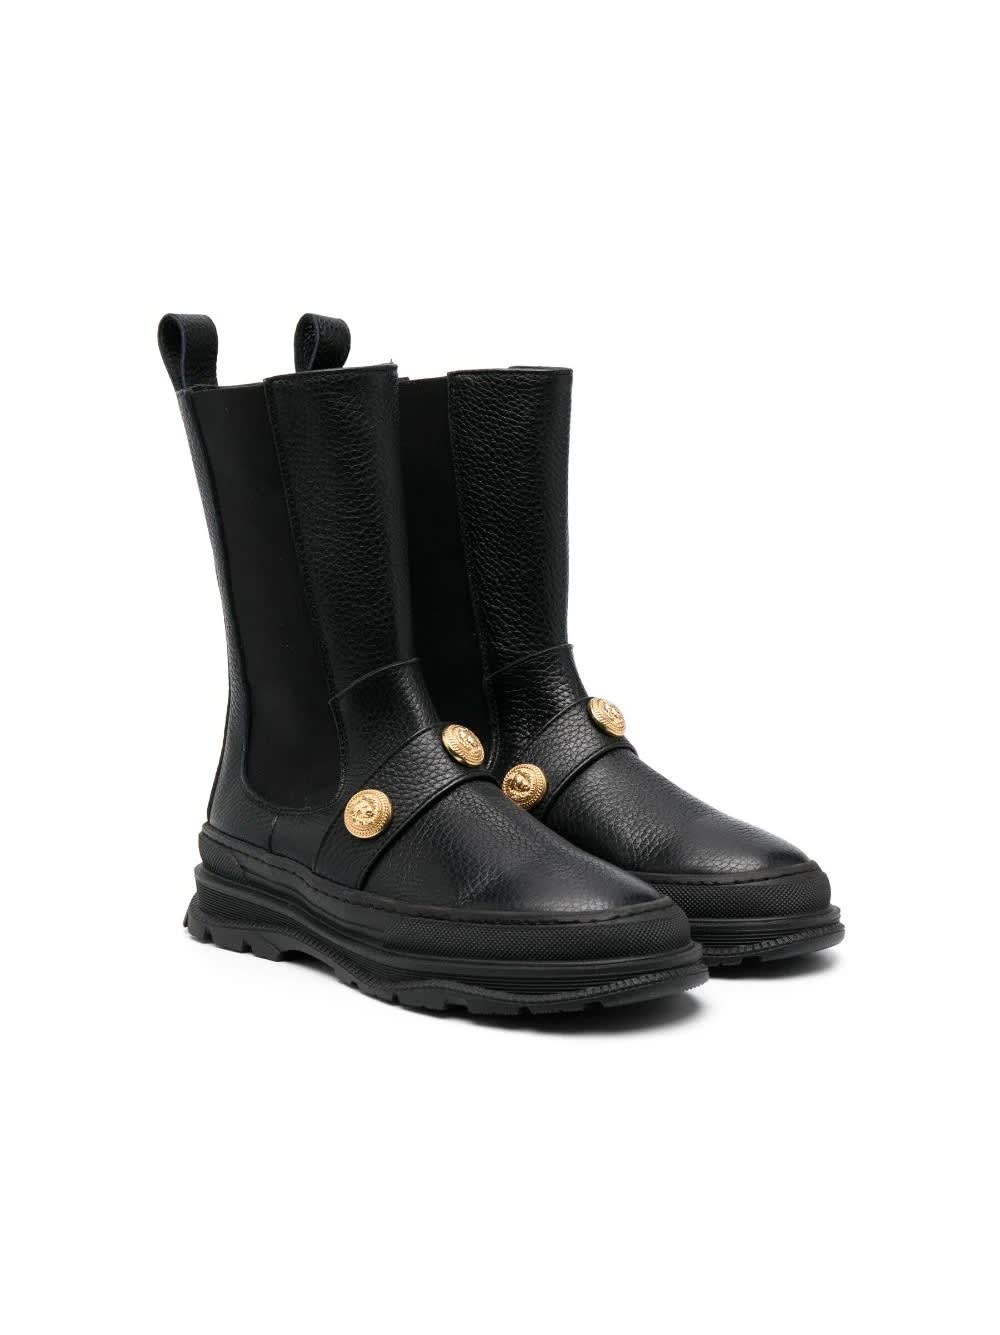 Balmain Black Boots With Gold Embossed Buttons